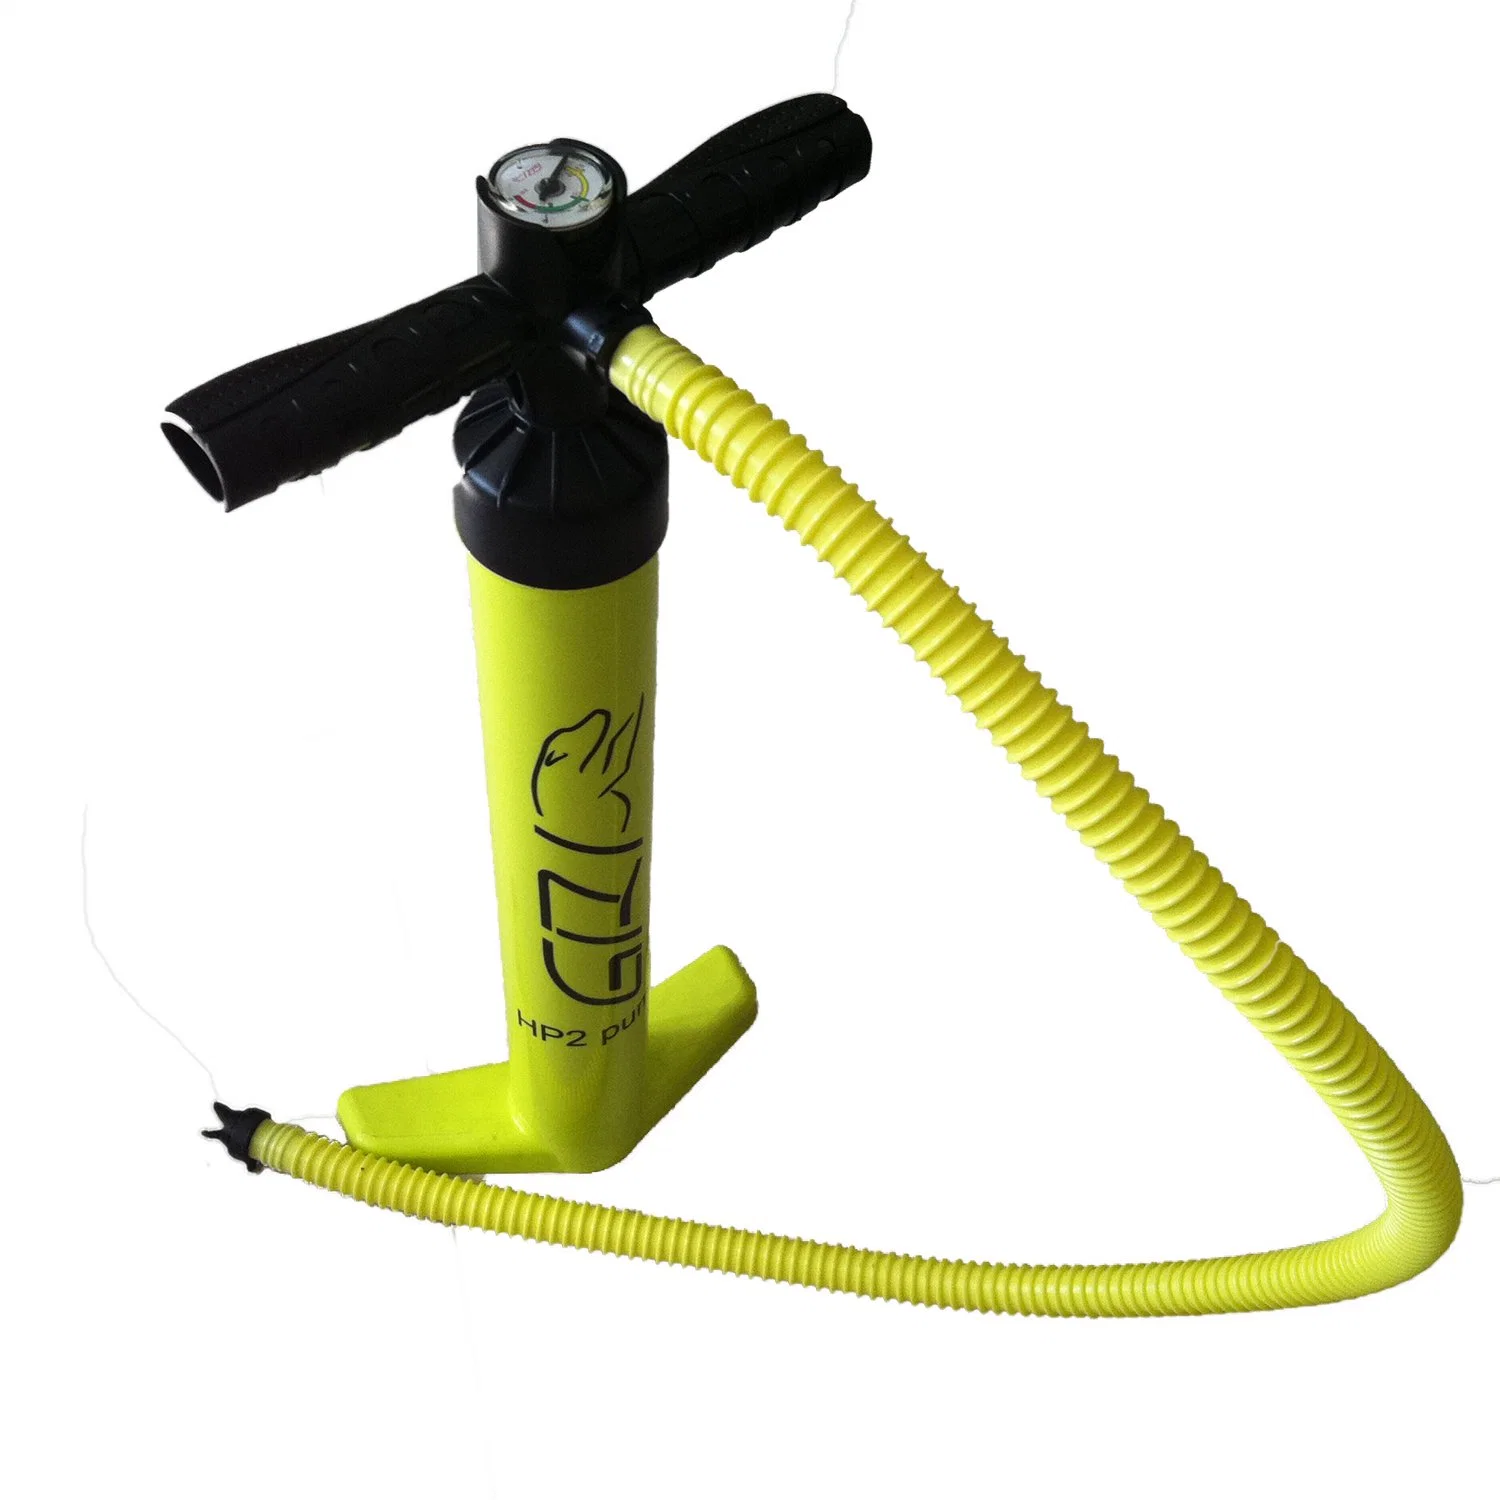 Dfaspo Stand-up Paddle Accessory Inflator Air Pump Double-Action